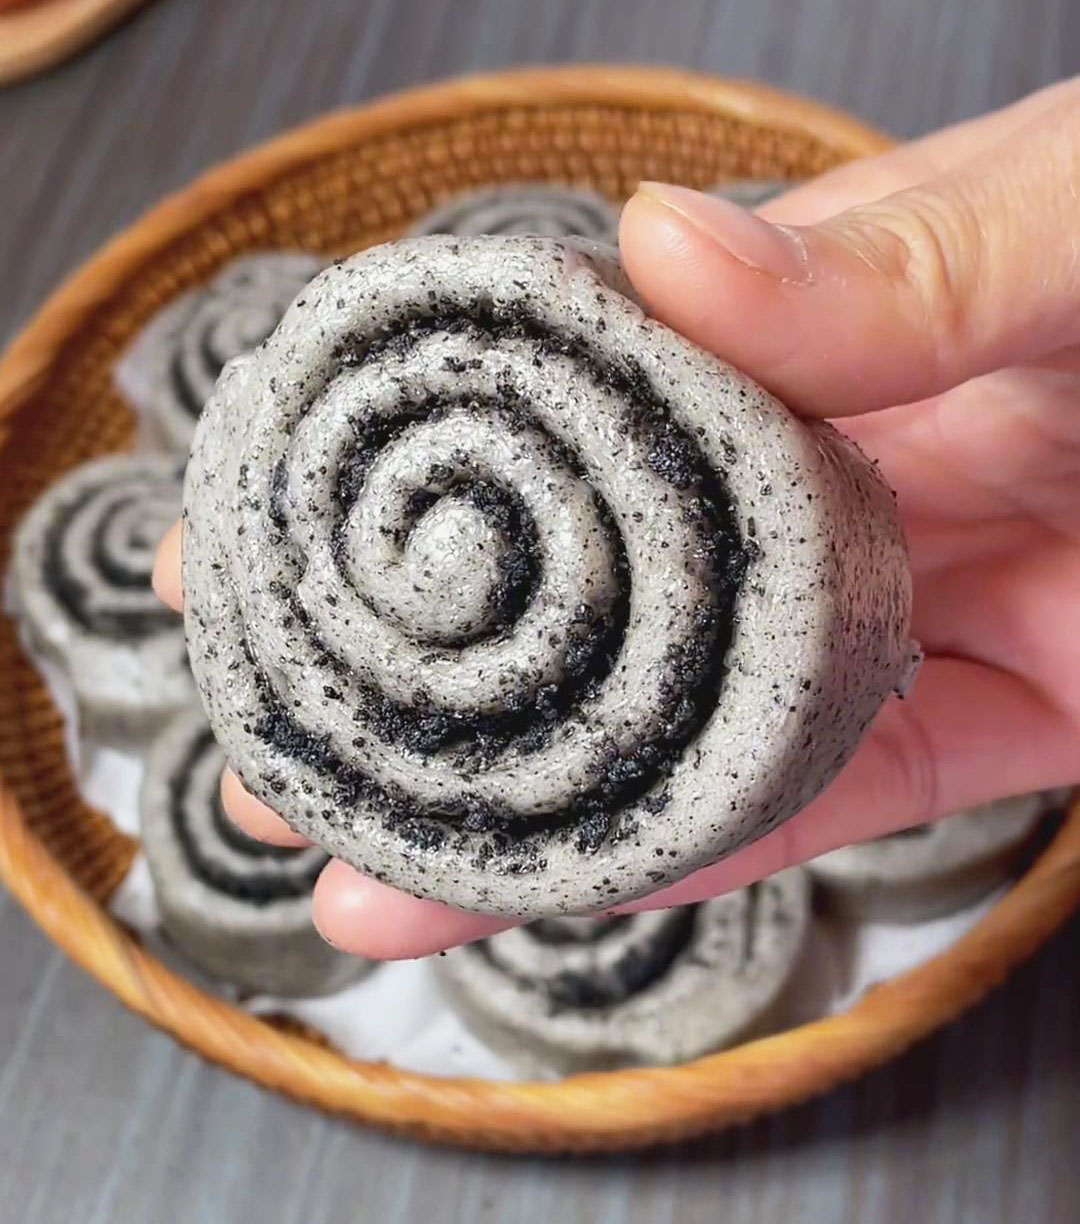 Black Sesame Rolls made without Peanuts